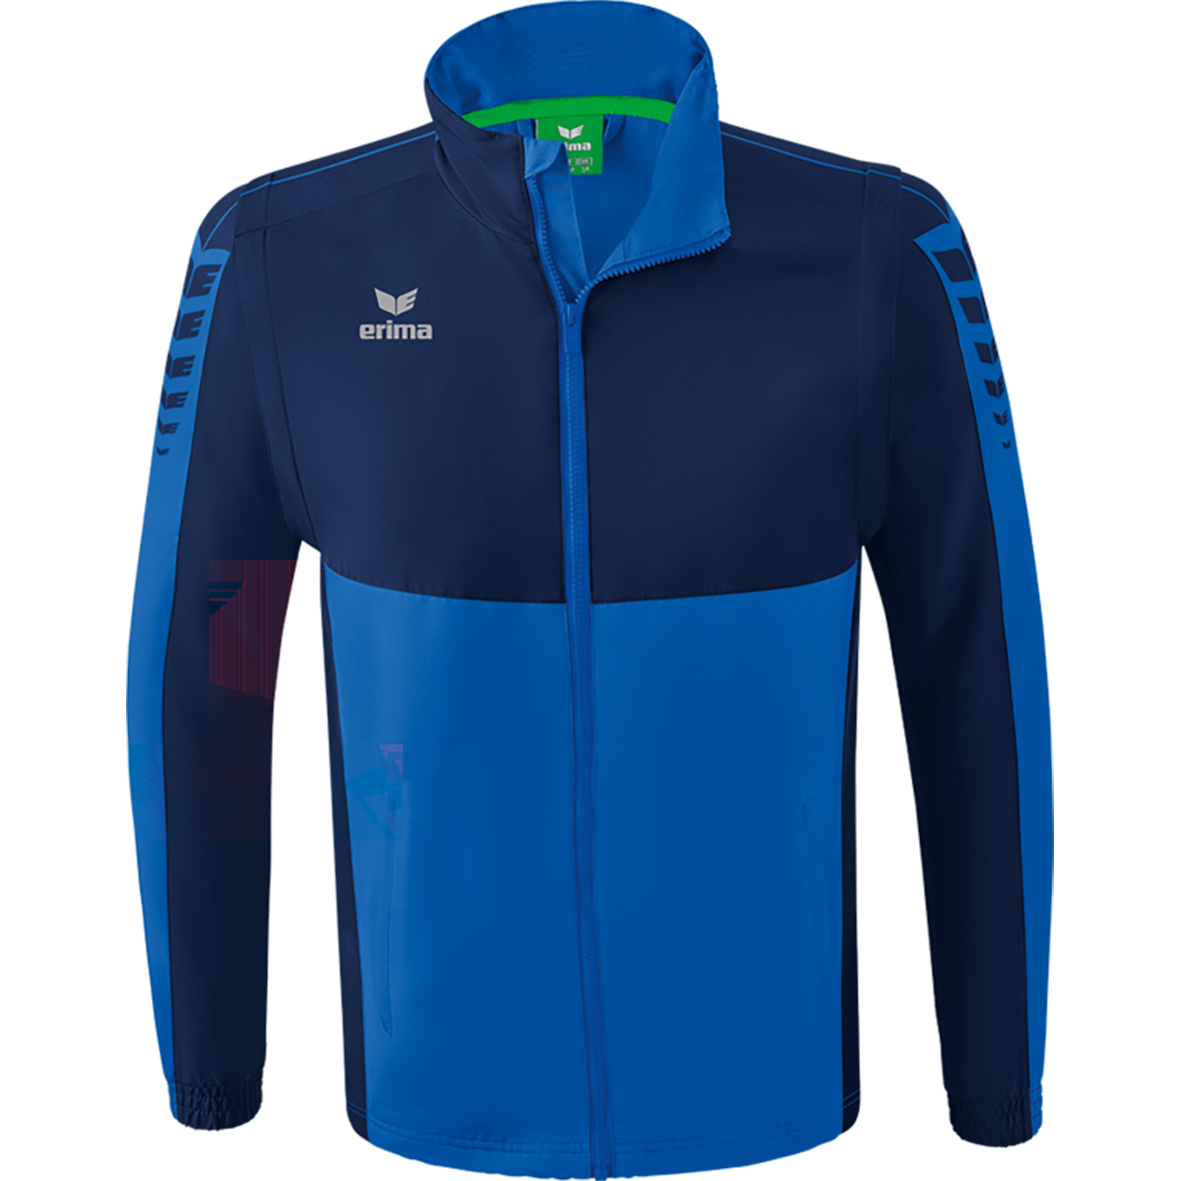 IMPERMEABLE ERIMA SIX WINGS CON MANGAS DESMONTABLES, ROYAL-MARINO HOMBRE.